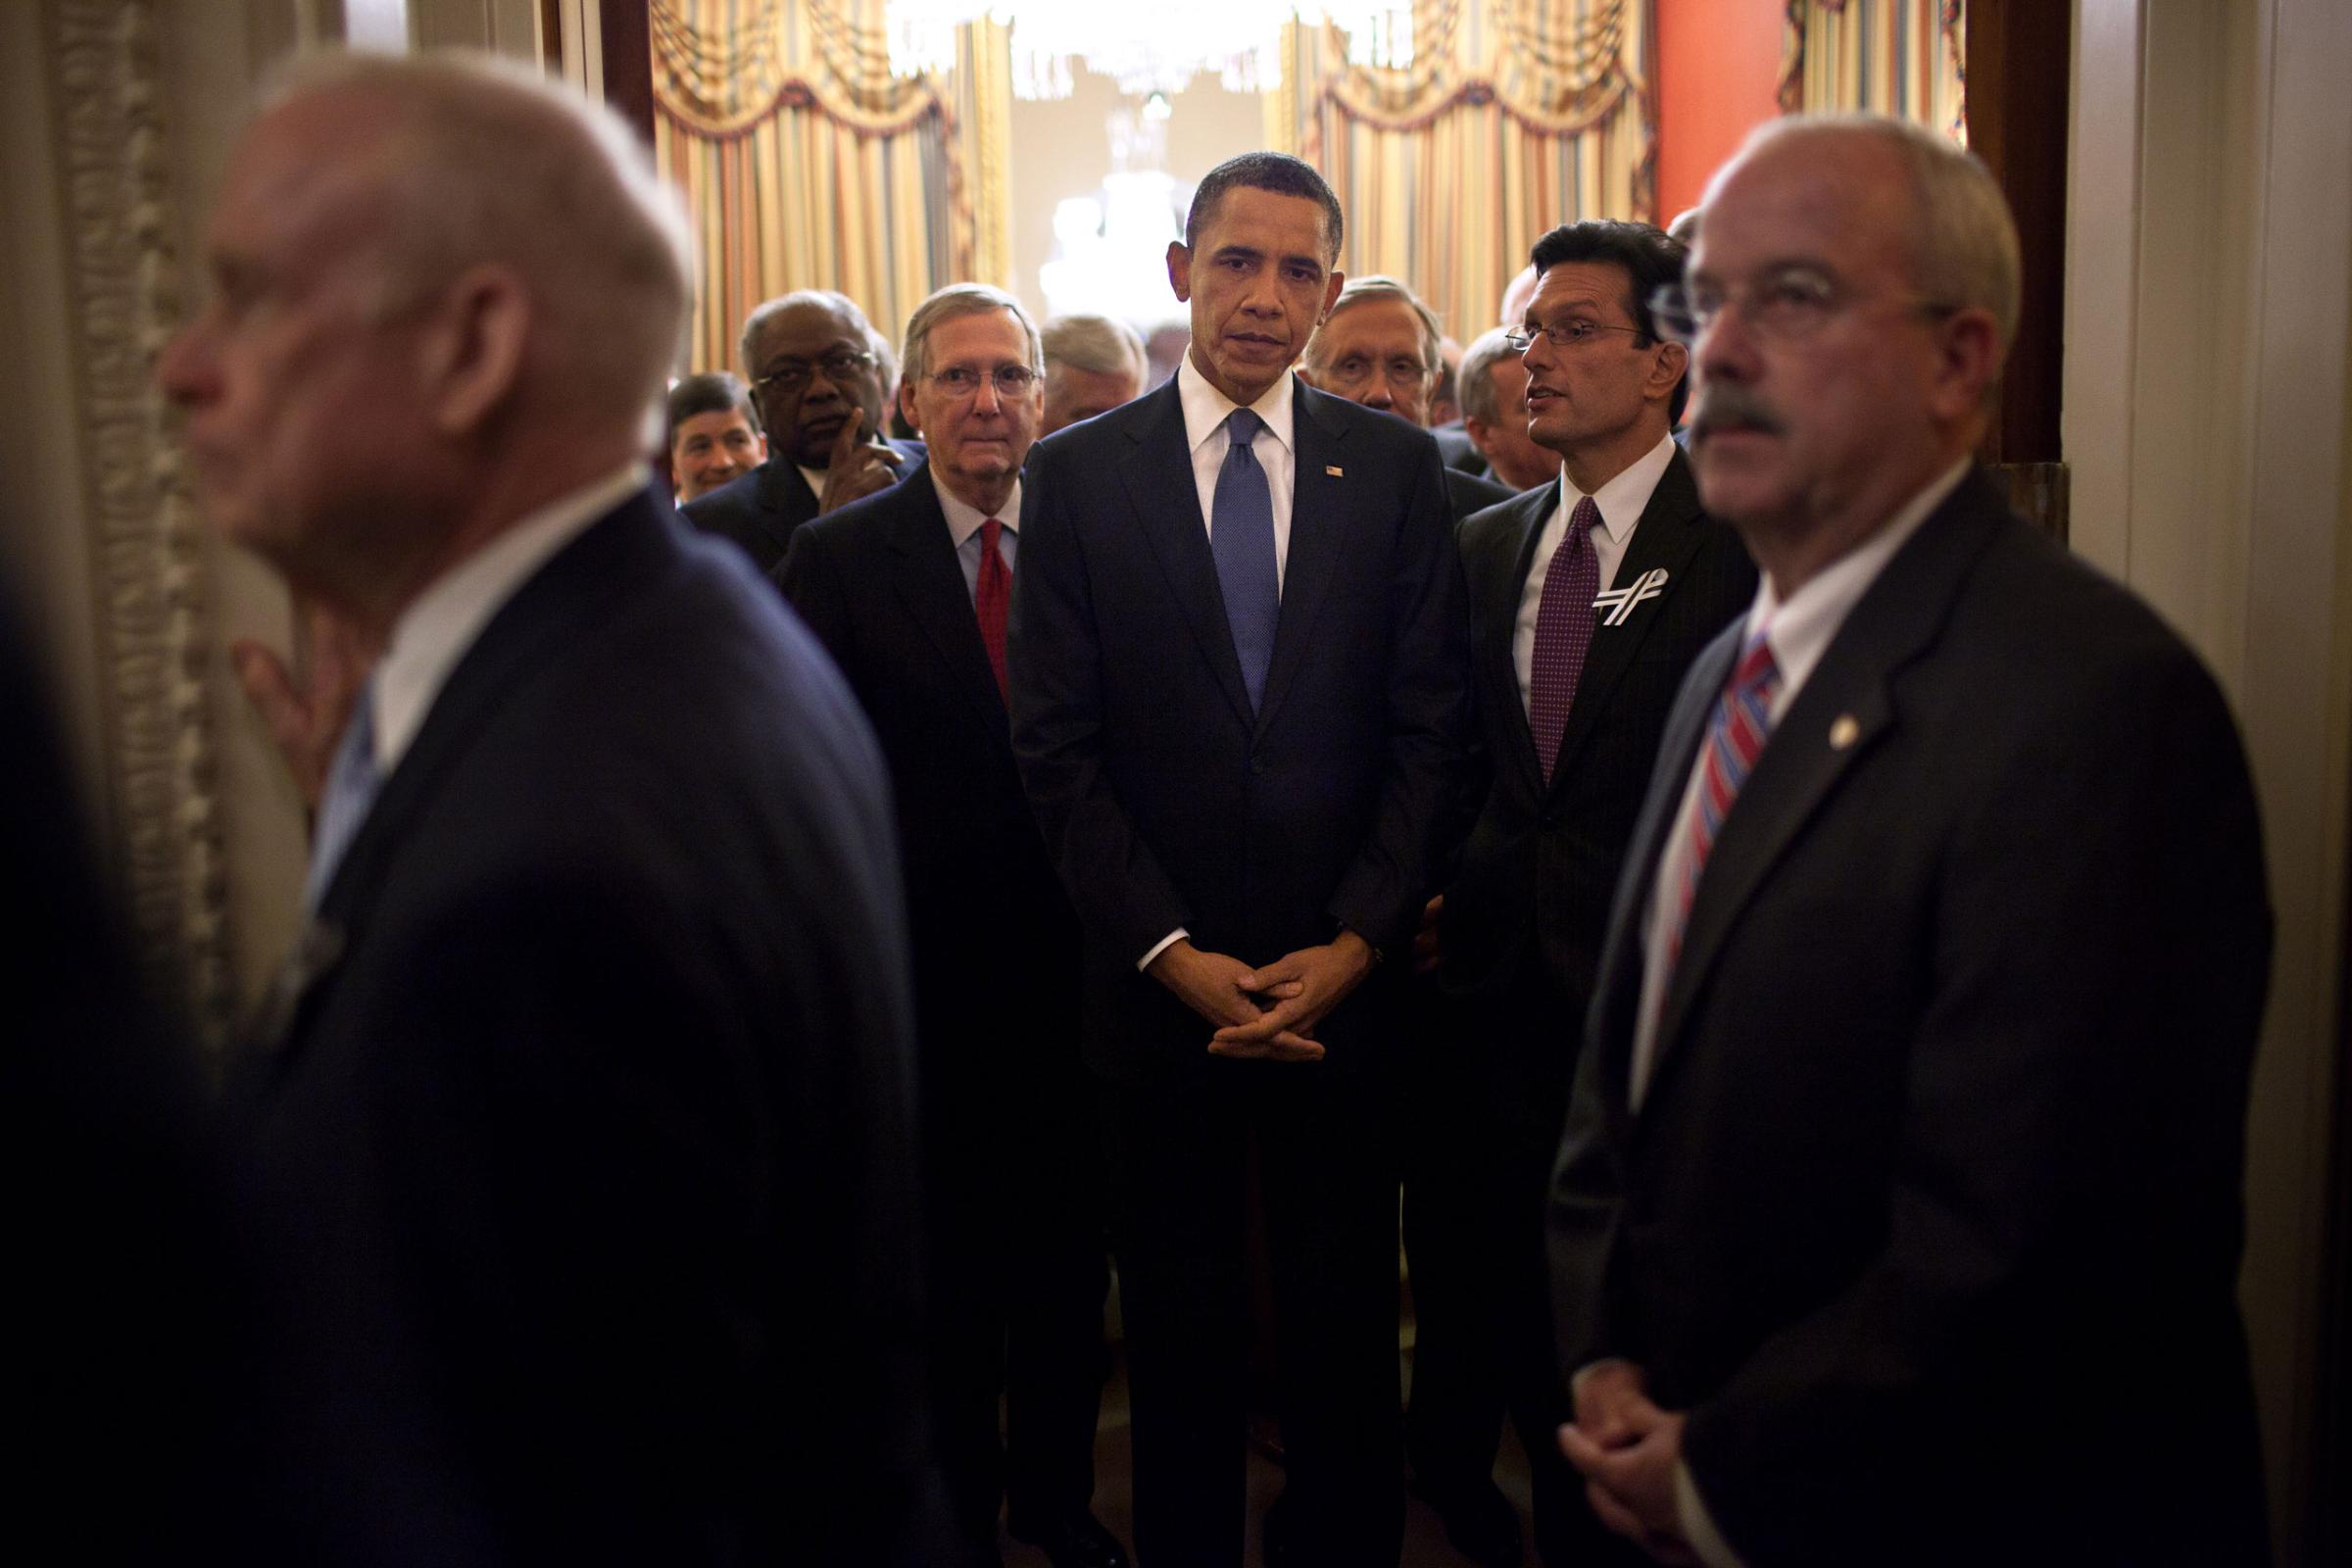 President Barack Obama stands with Members of Congress in House Speaker John Boehner's ceremonial office as Bill Livingood, House Sergeant at Arms, left, and Terrance Gainer, Senate Sergeant at Arms, right, prepare to escort them onto the floor of the House Chamber at the U.S. Capitol, Jan. 25, 2011.